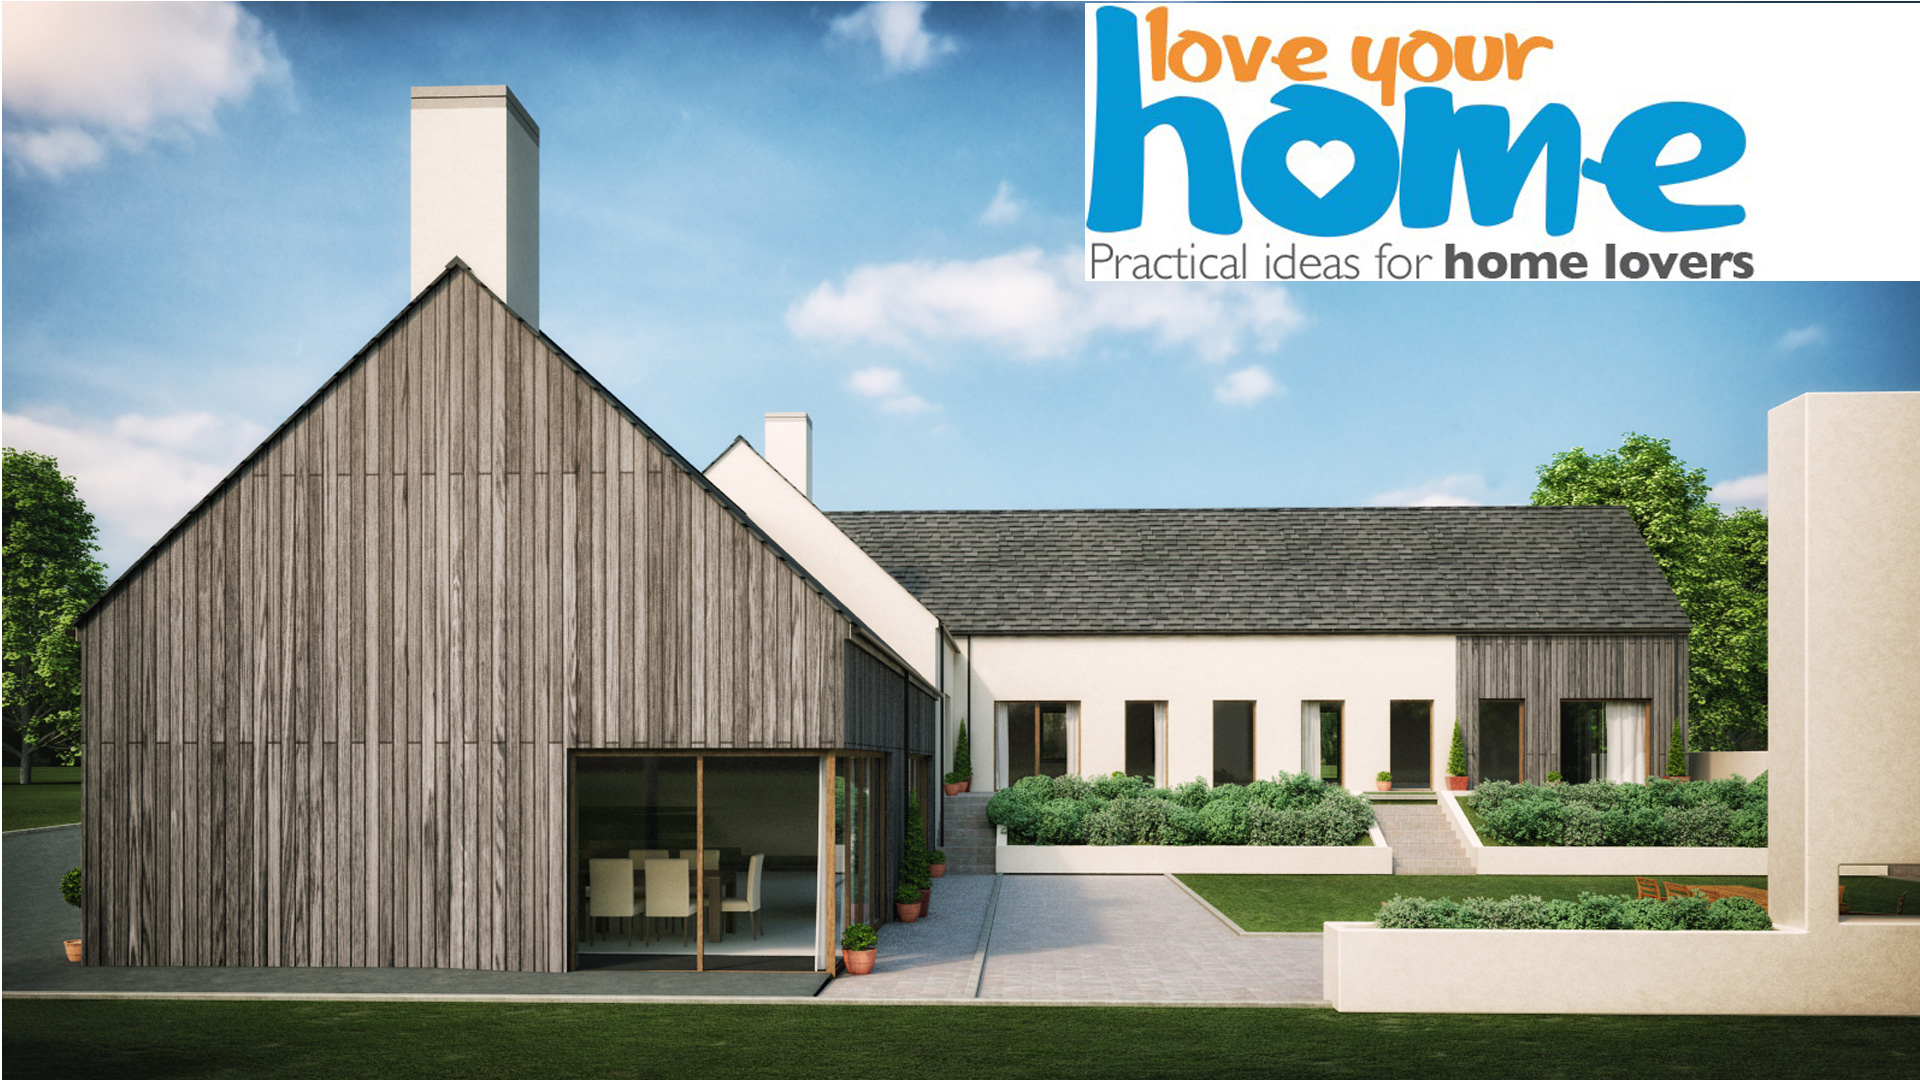 FREE LOVE YOUR HOME SHOW TICKETS!!!! WE'LL BE THERE!!! Slemish Design